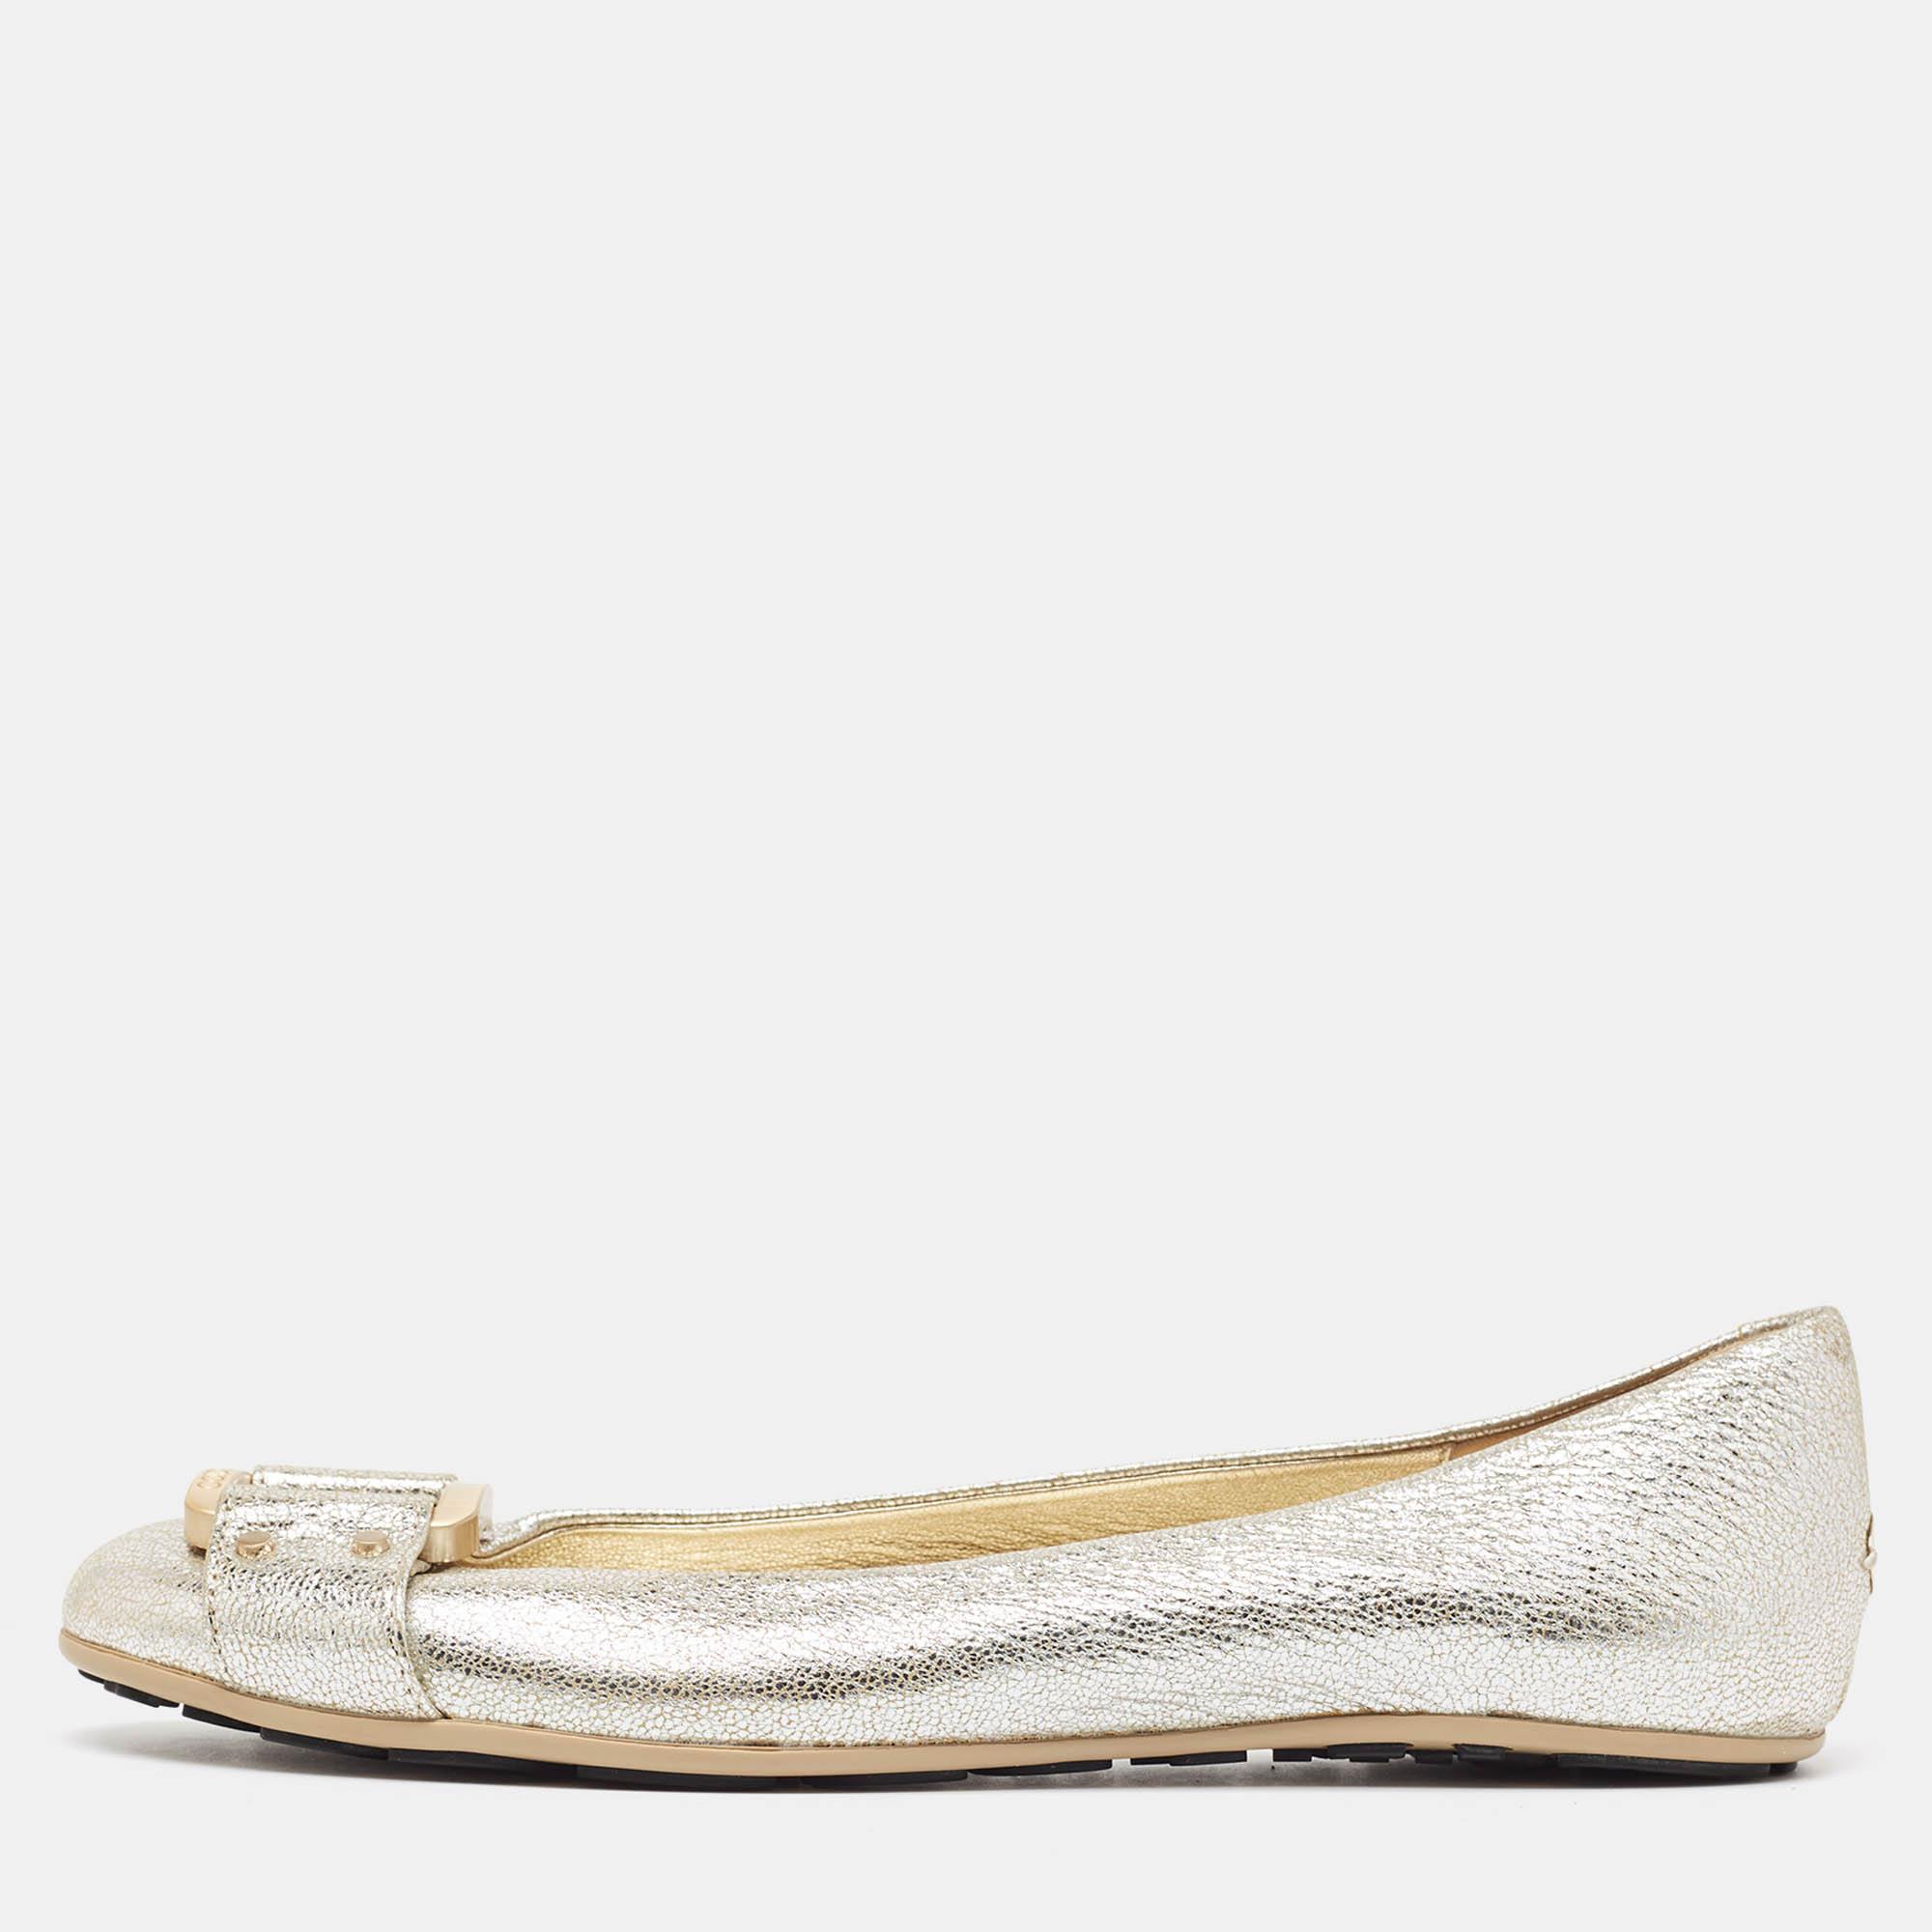 Pre-owned Jimmy Choo Silver Leather Morse Ballet Flats Size 38.5